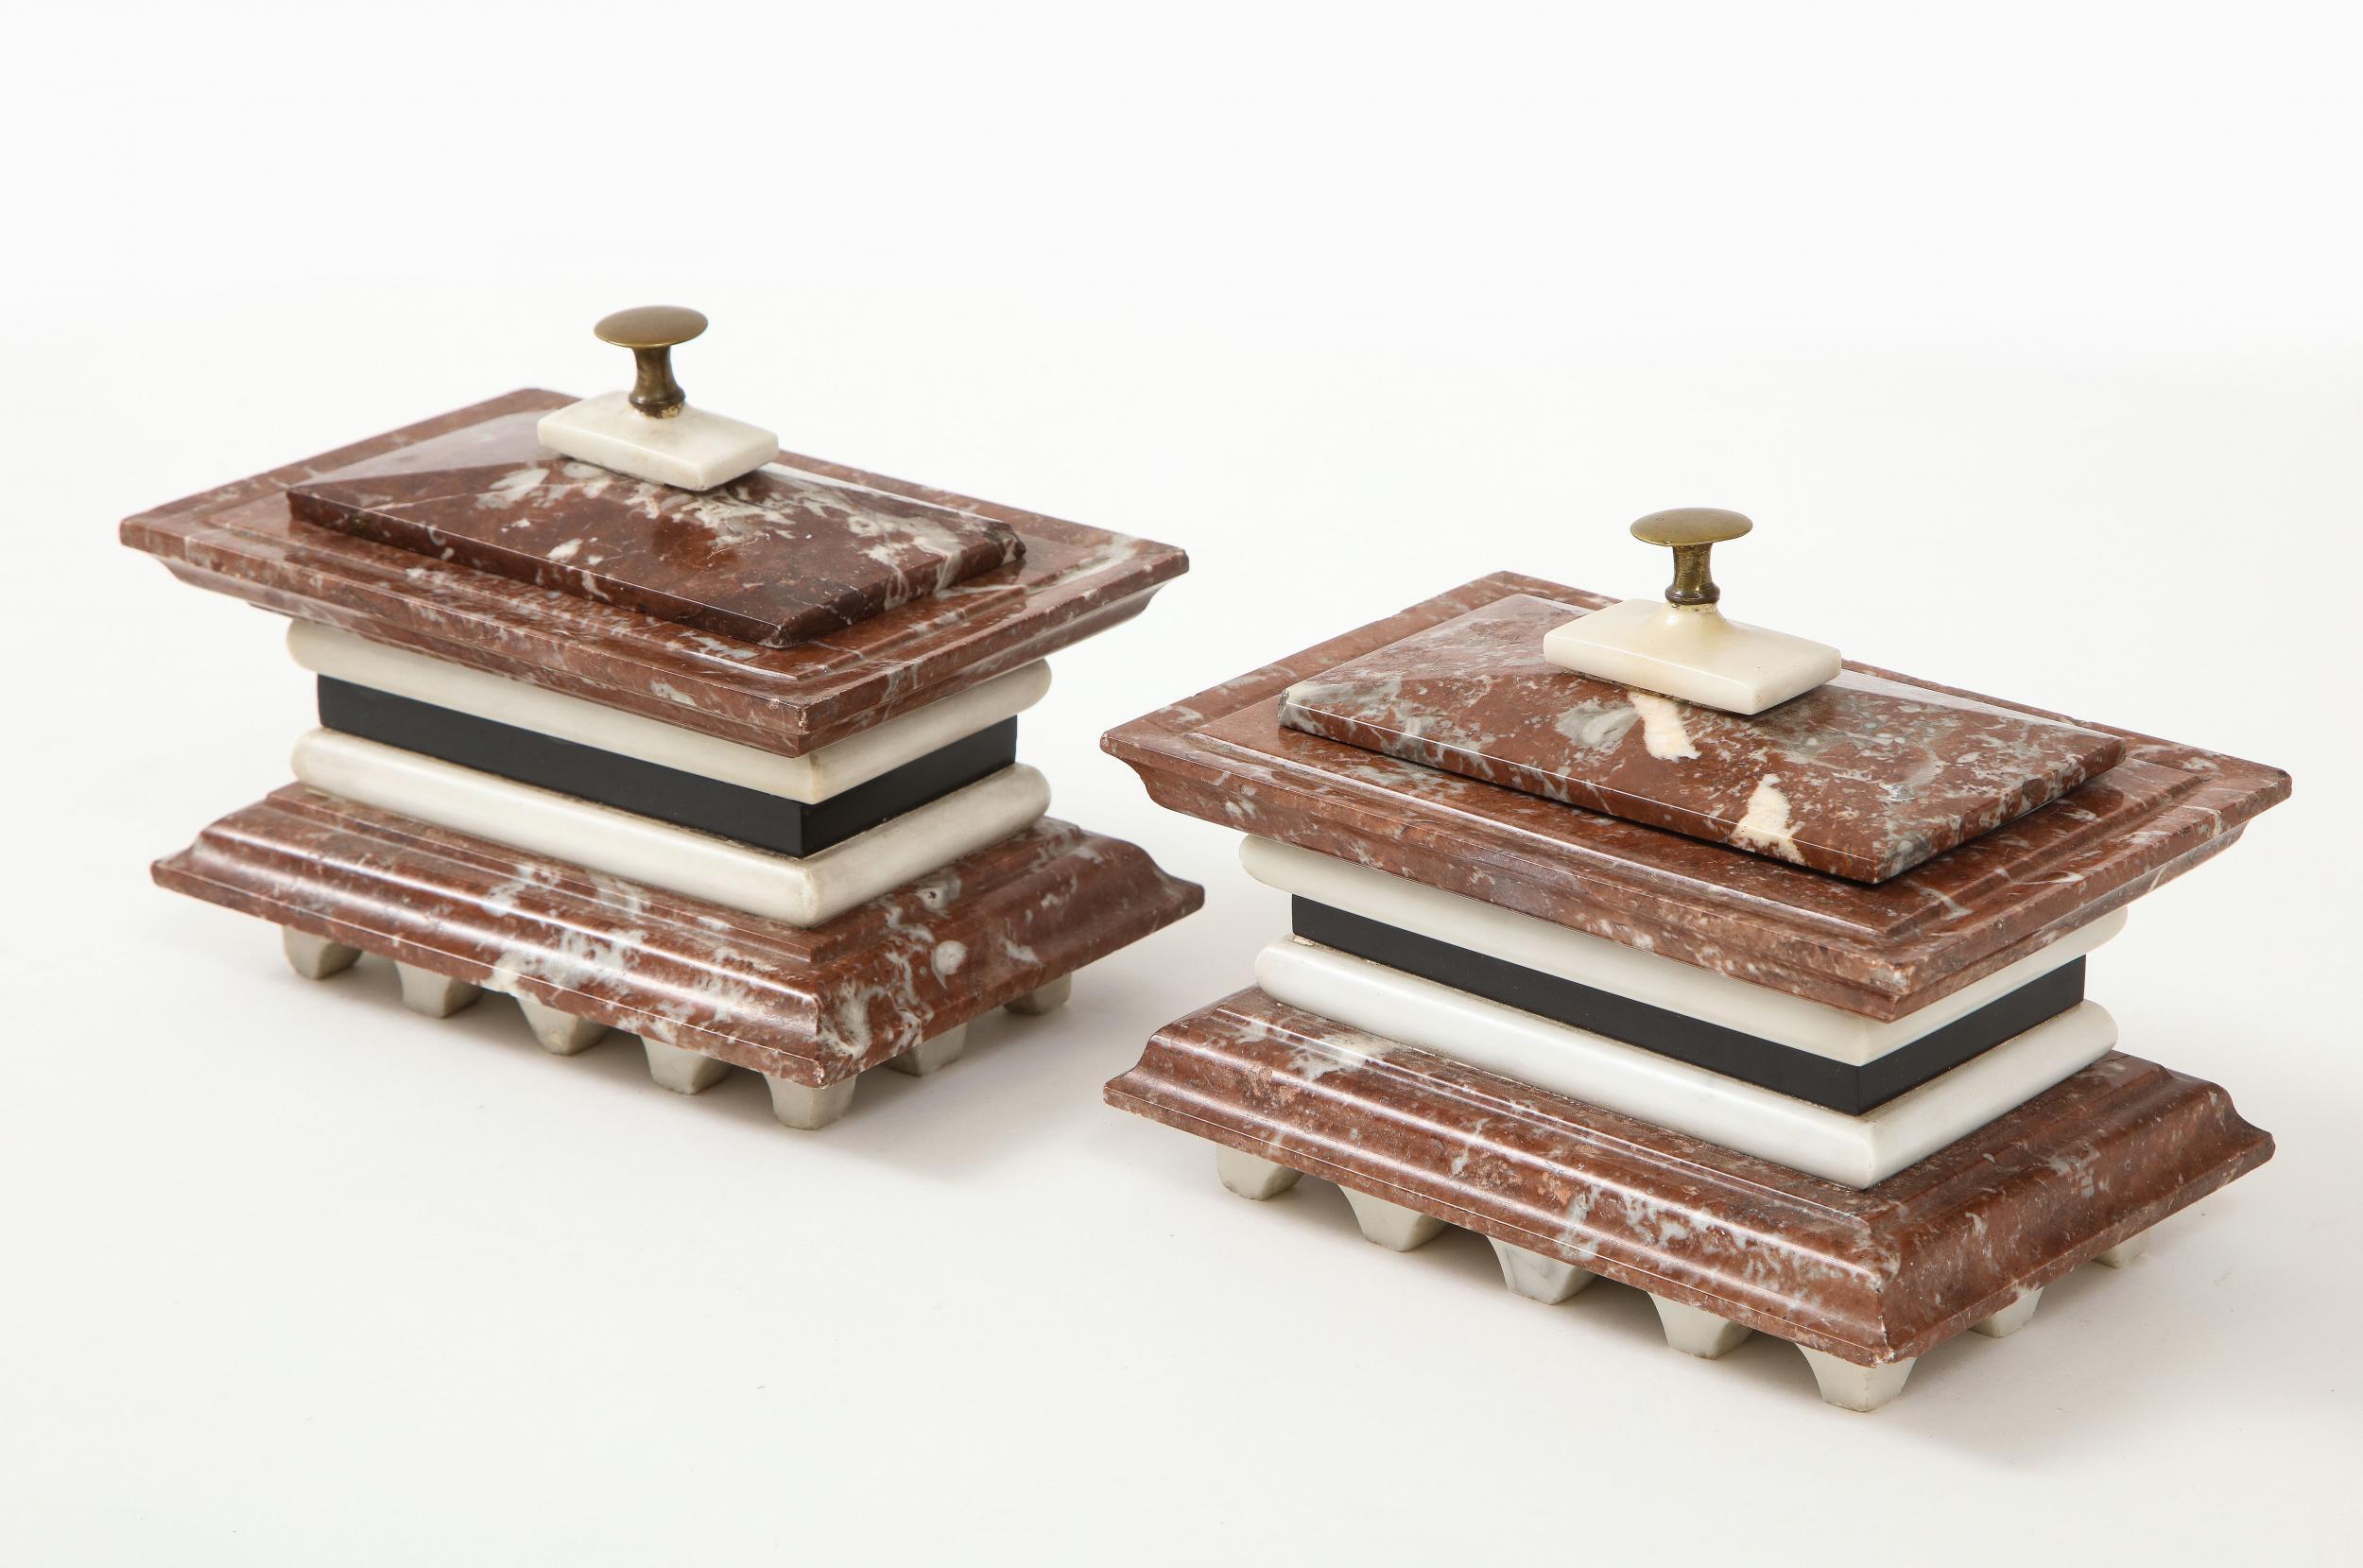 A pair of Italian marble ink wells with covered well and brass handle. Beautiful contrasting black, white, and red marbles make up the body and lid of this pair. White late 19th century, circa 1890.